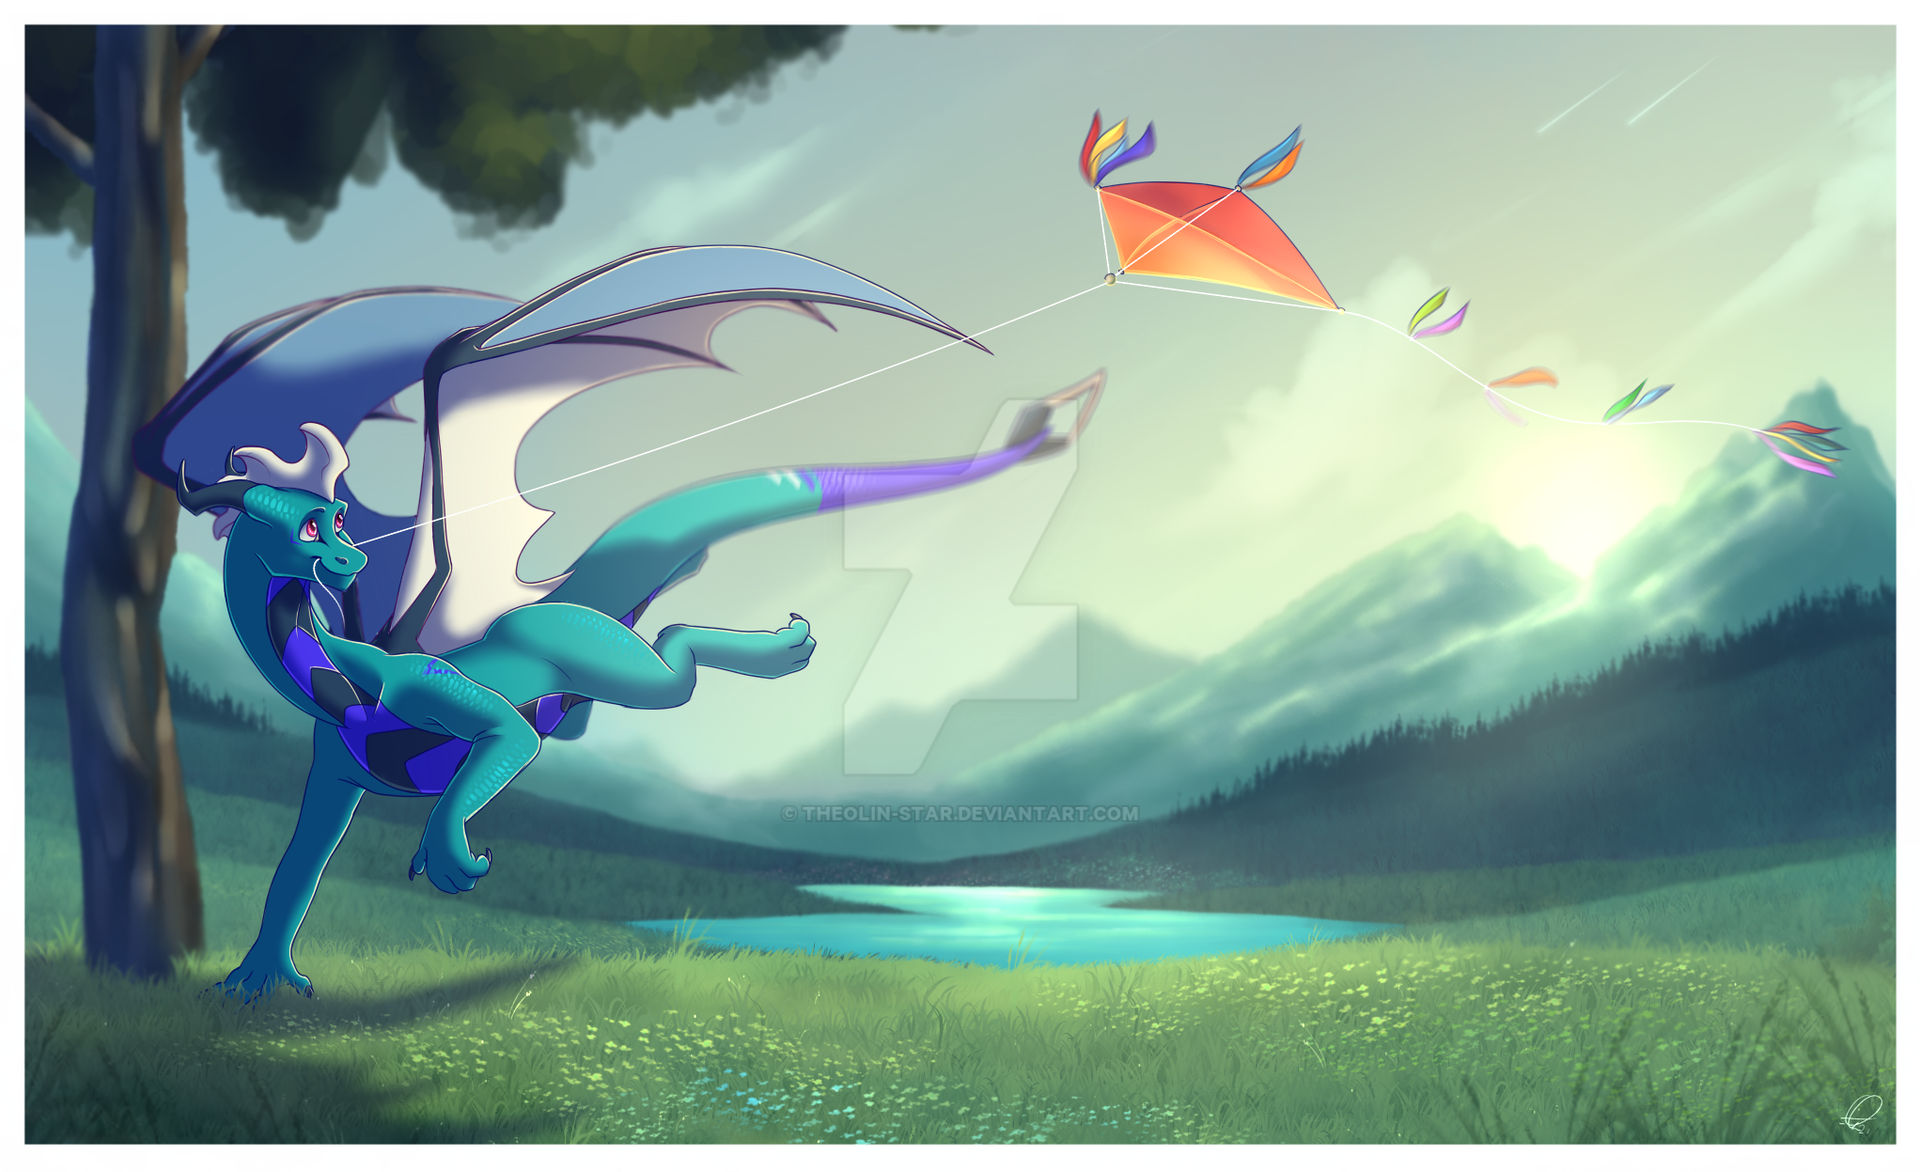 kite_by_theolin_star_dewgdl1-fullview.png